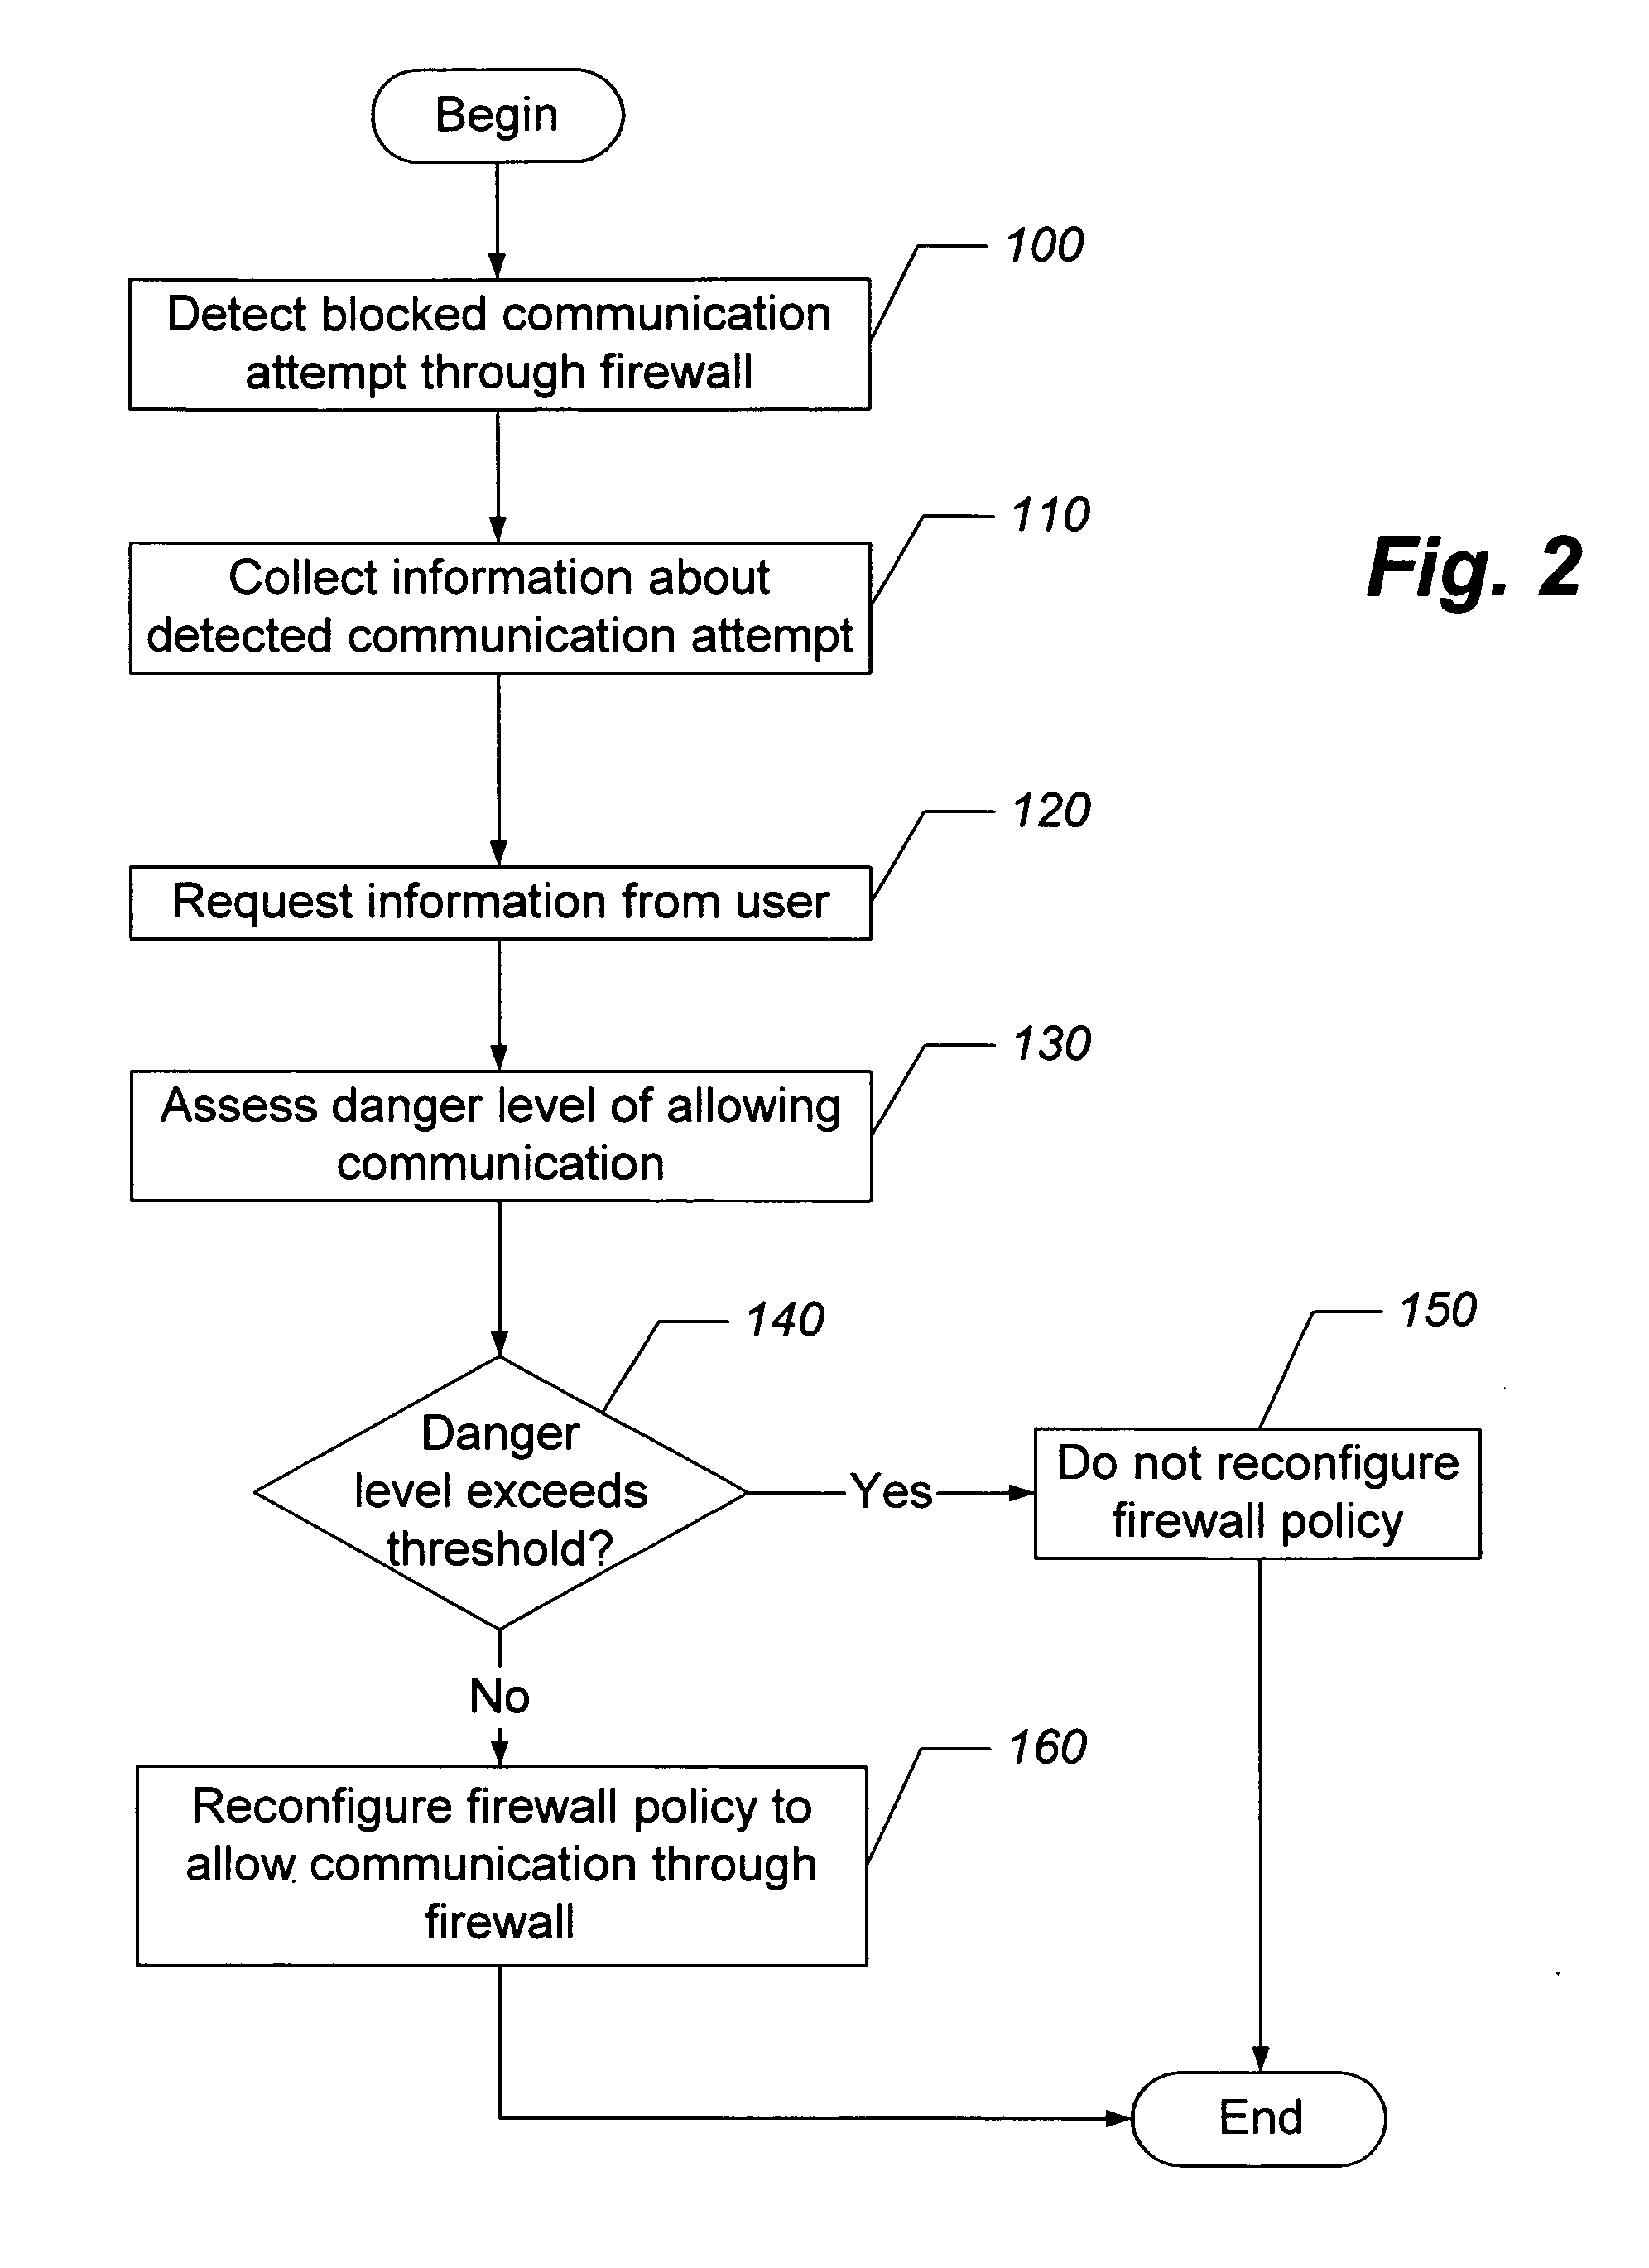 Methods, systems, and computer program products for automatically configuring firewalls